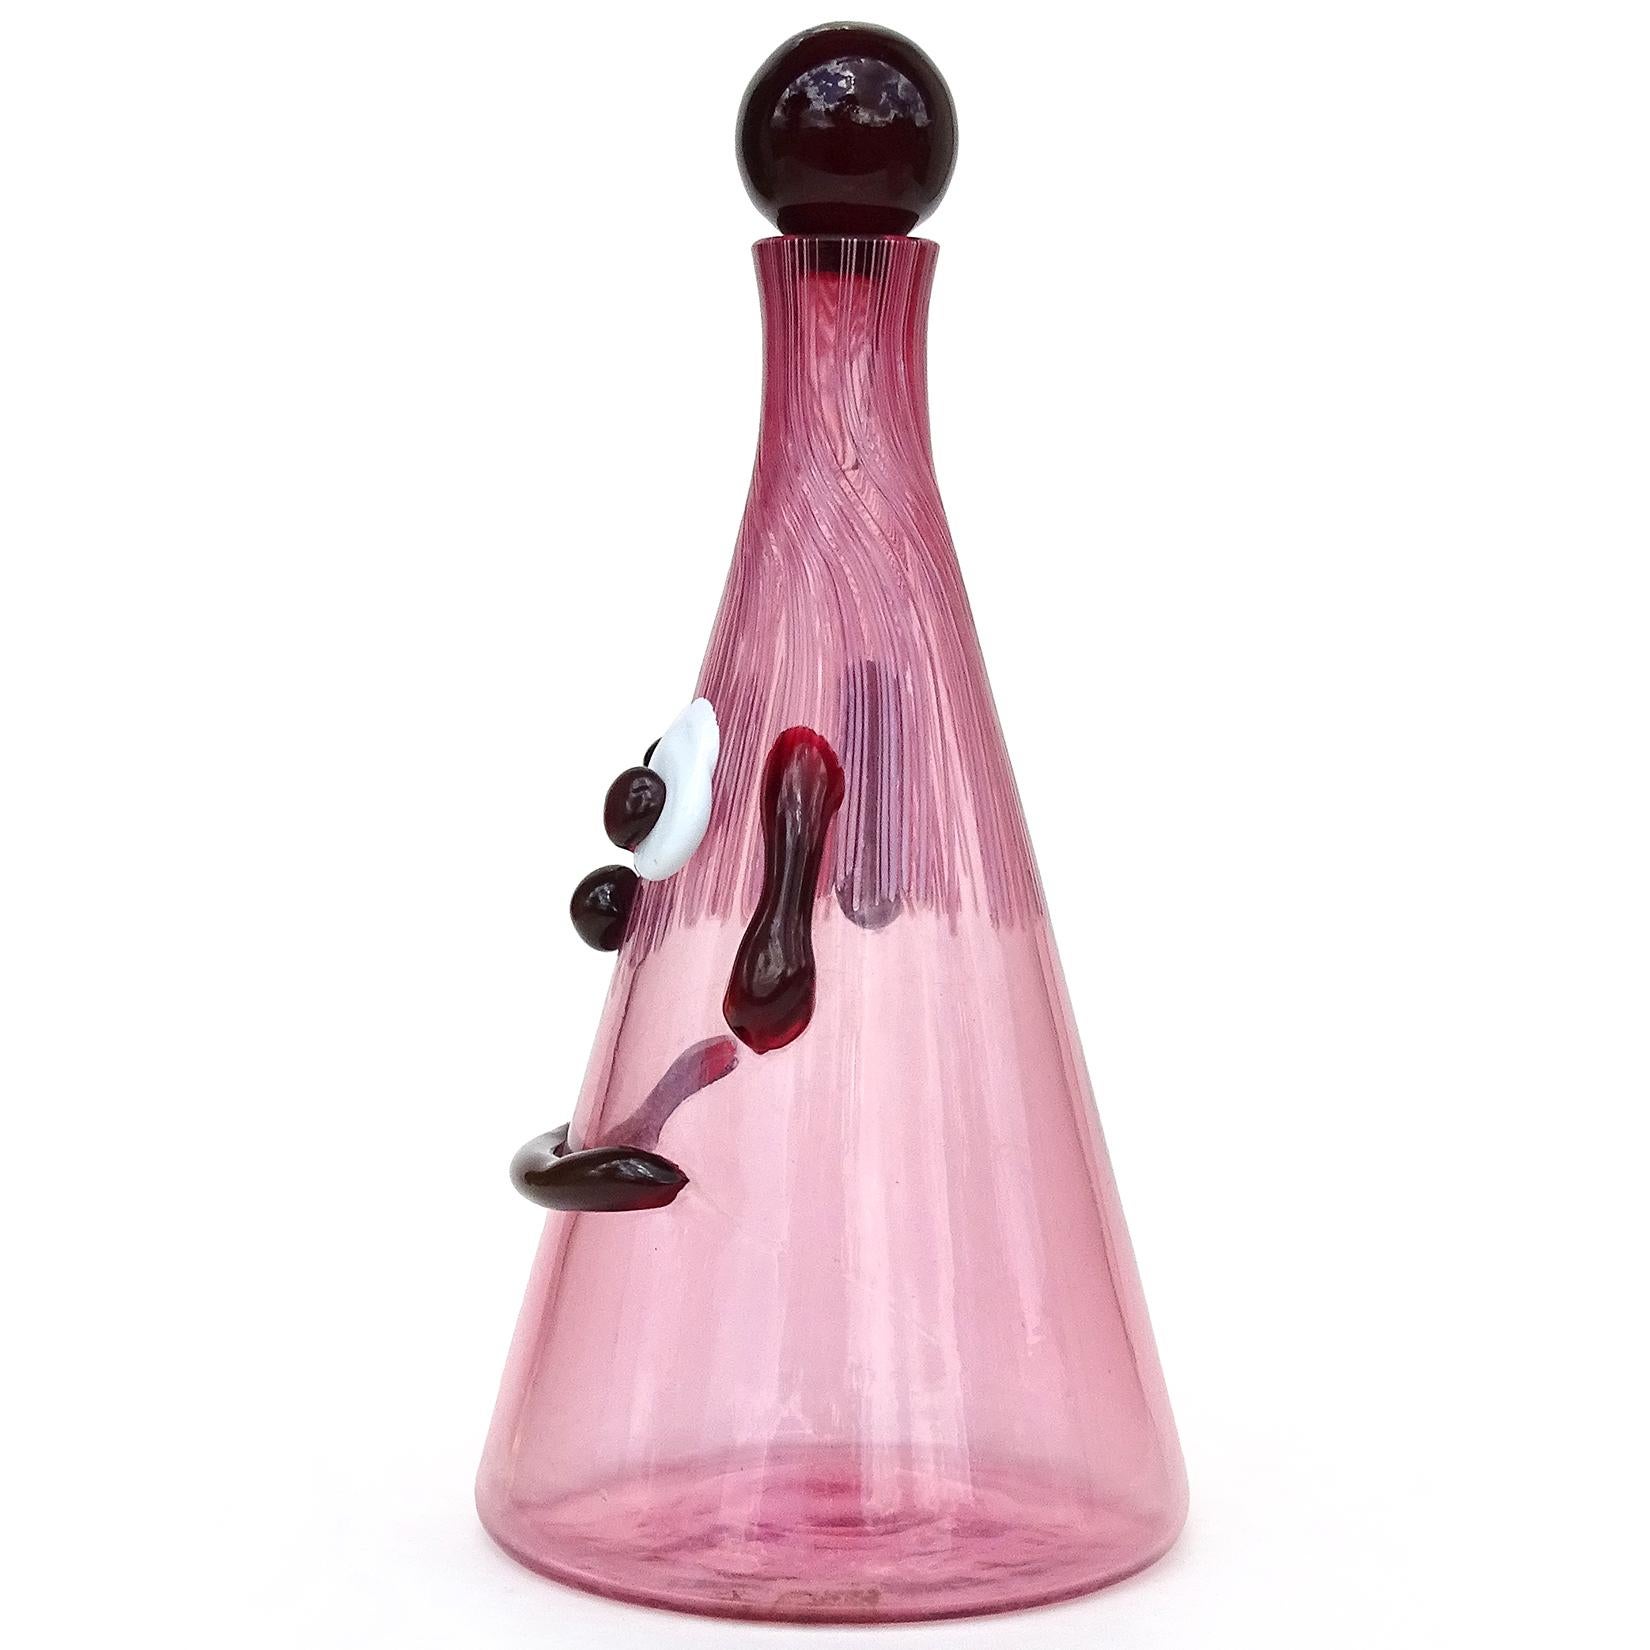 Cute and rare, vintage Murano hand blown Italian art glass cranberry pink clown face decanter, with red accents. Documented to the Fratelli Toso Company. The bottle has droopy ears, wide eyes, a big smile, and threads of light pink glass for the